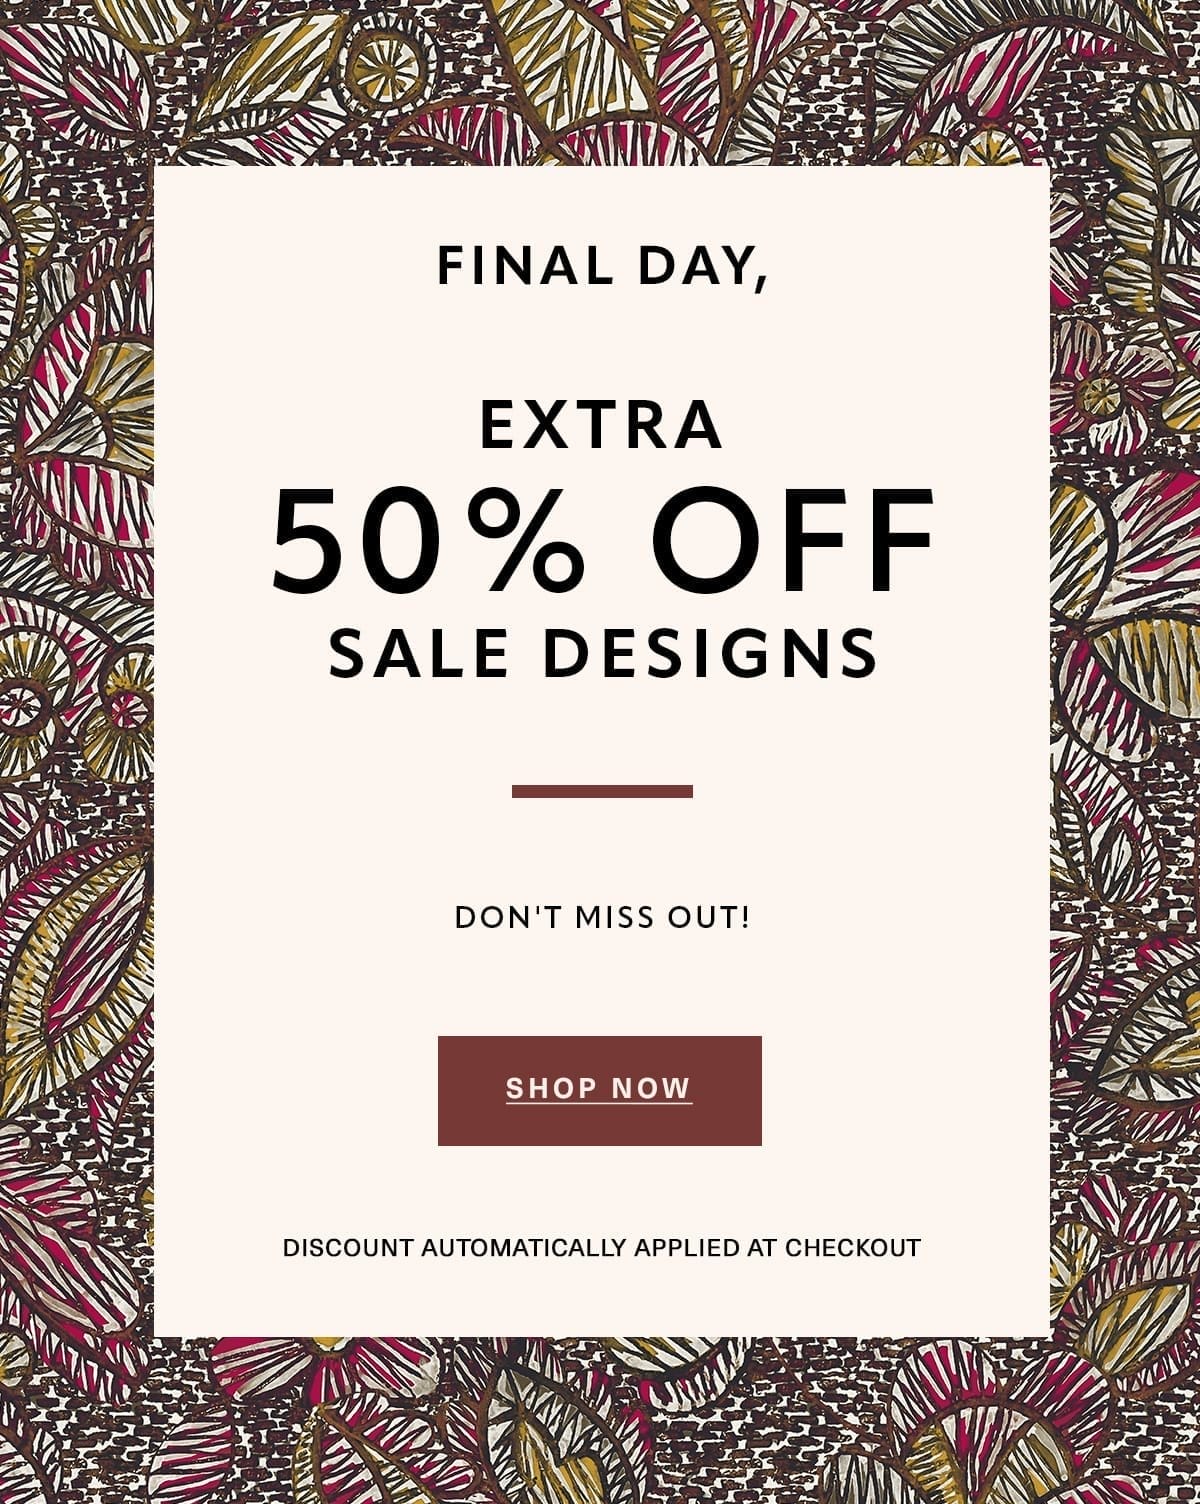 FINAL DAY, EXTRA 50% OFF SALE DESIGNS - Don't Miss Out! Discount Automatically Applied at Checkout SHOP NOW